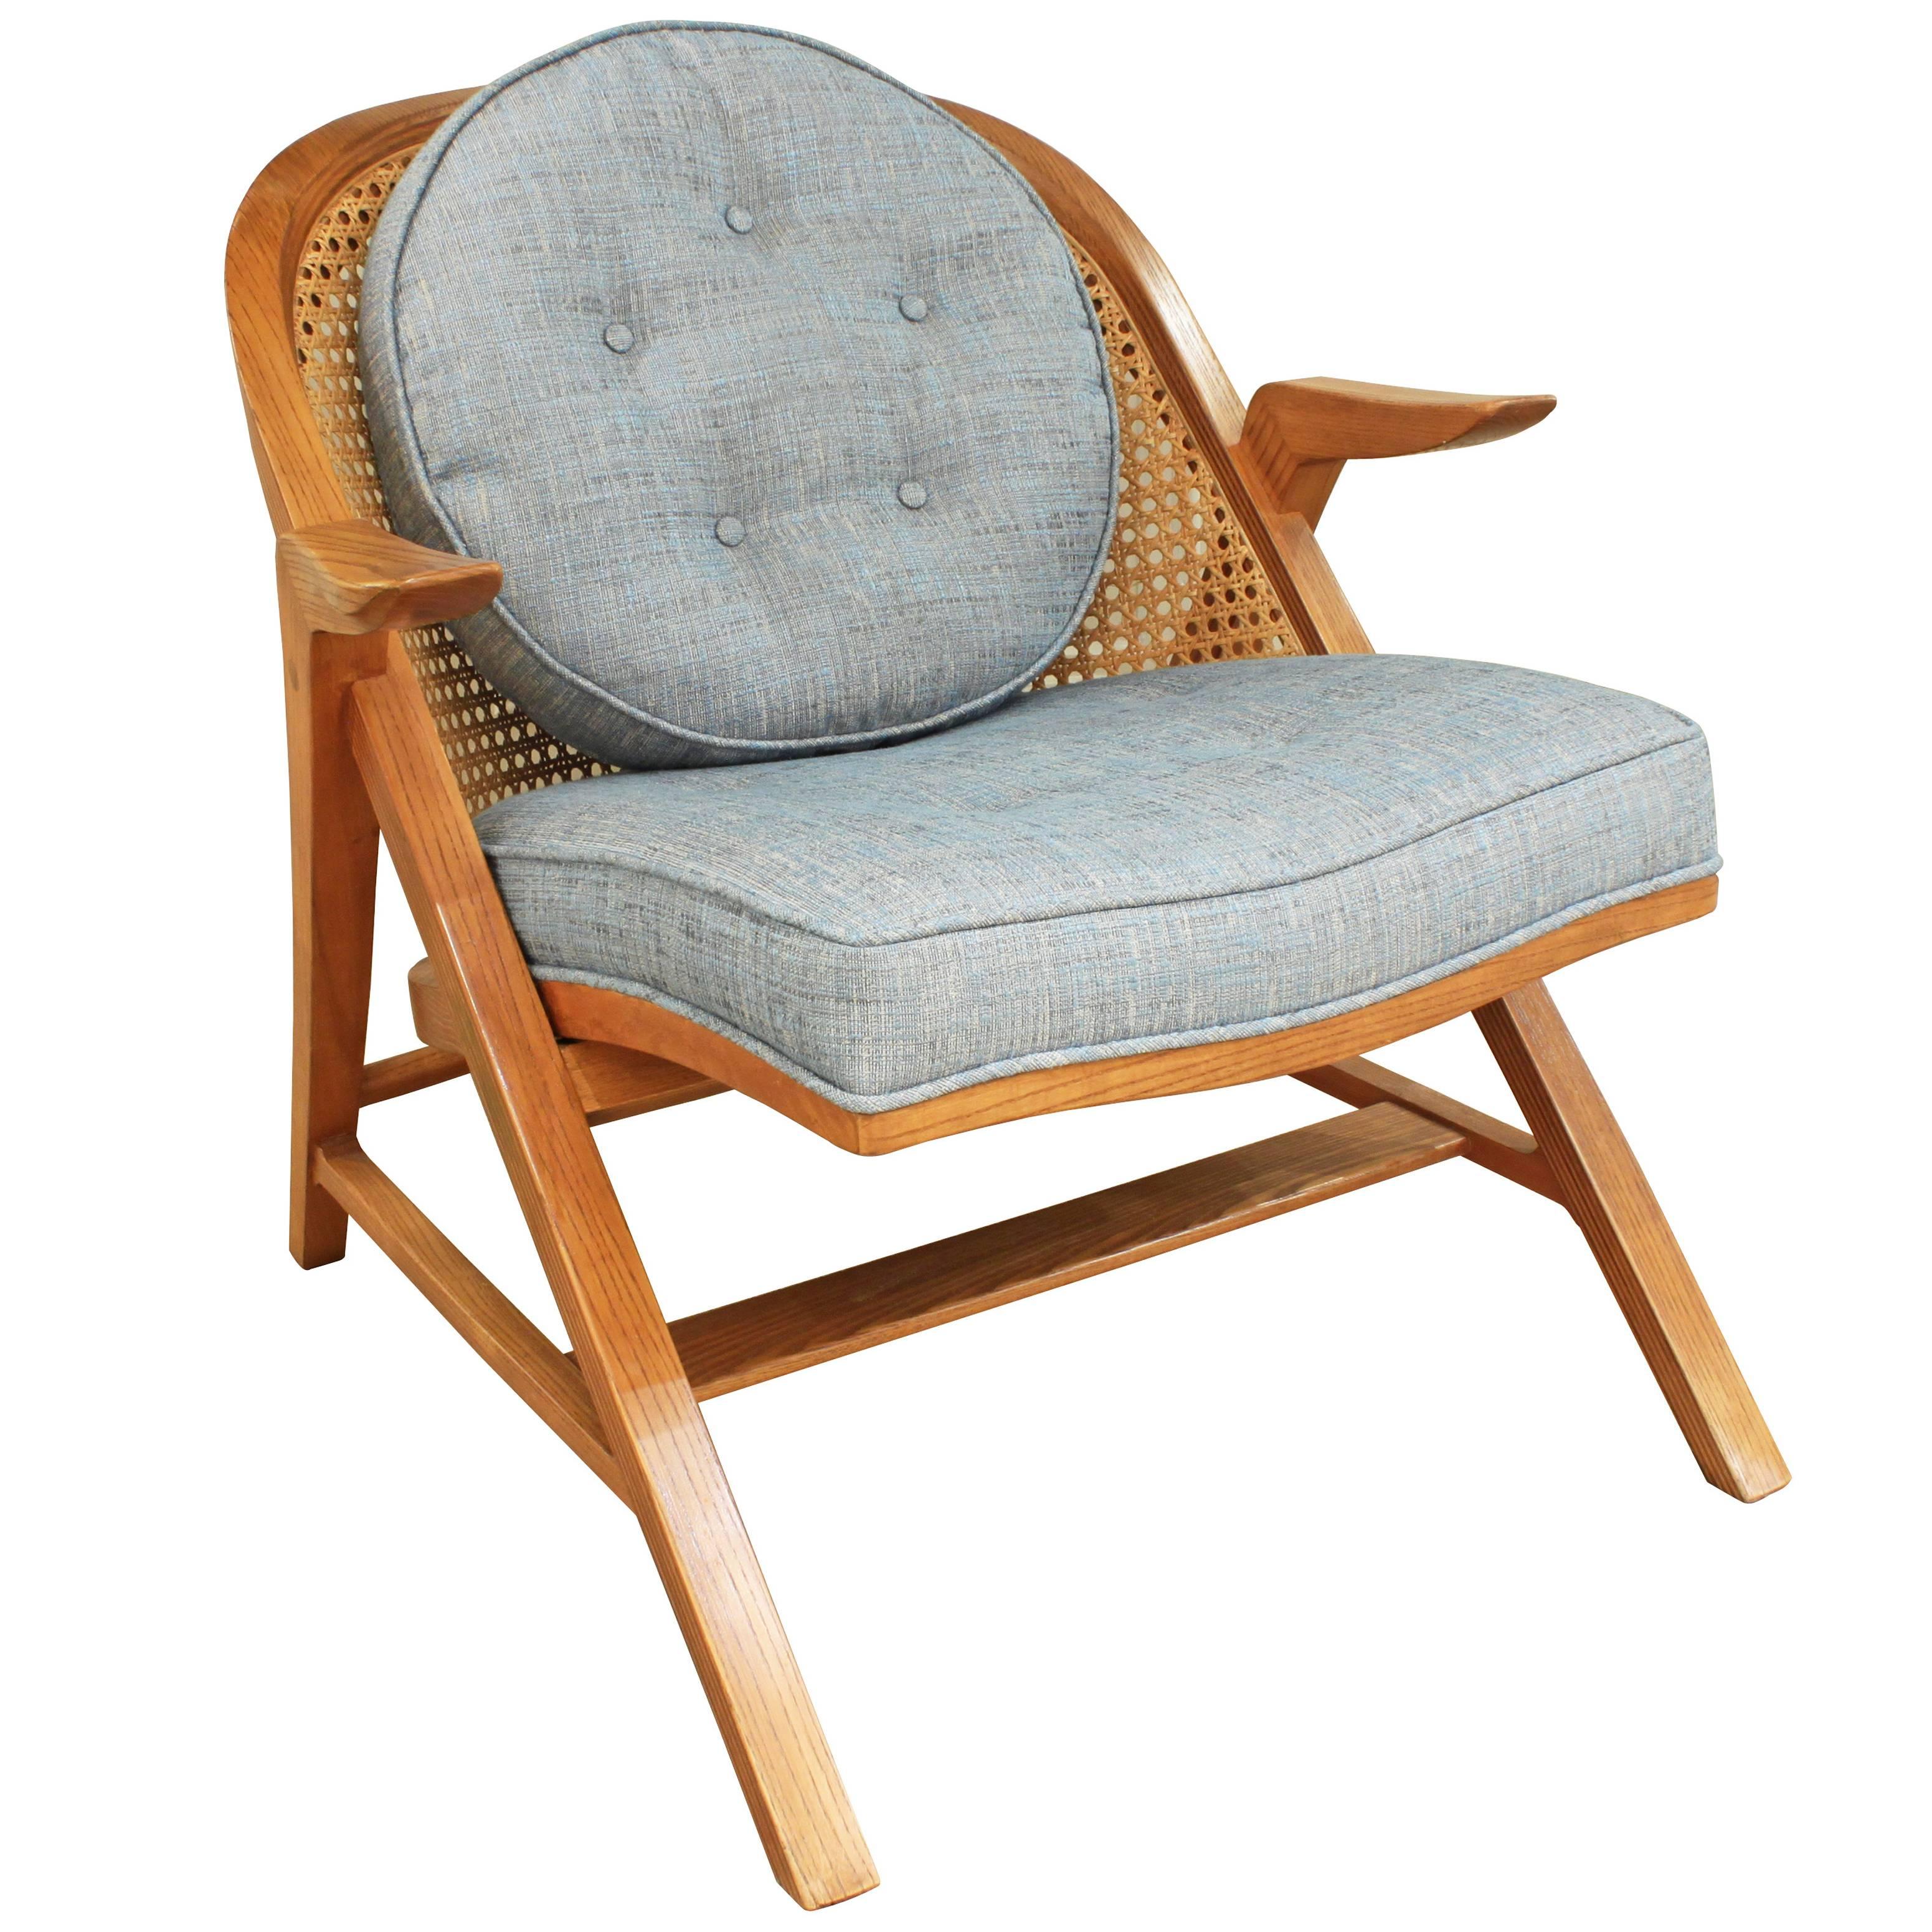 Rare and Exceptional Lounge Chair by Edward Wormley